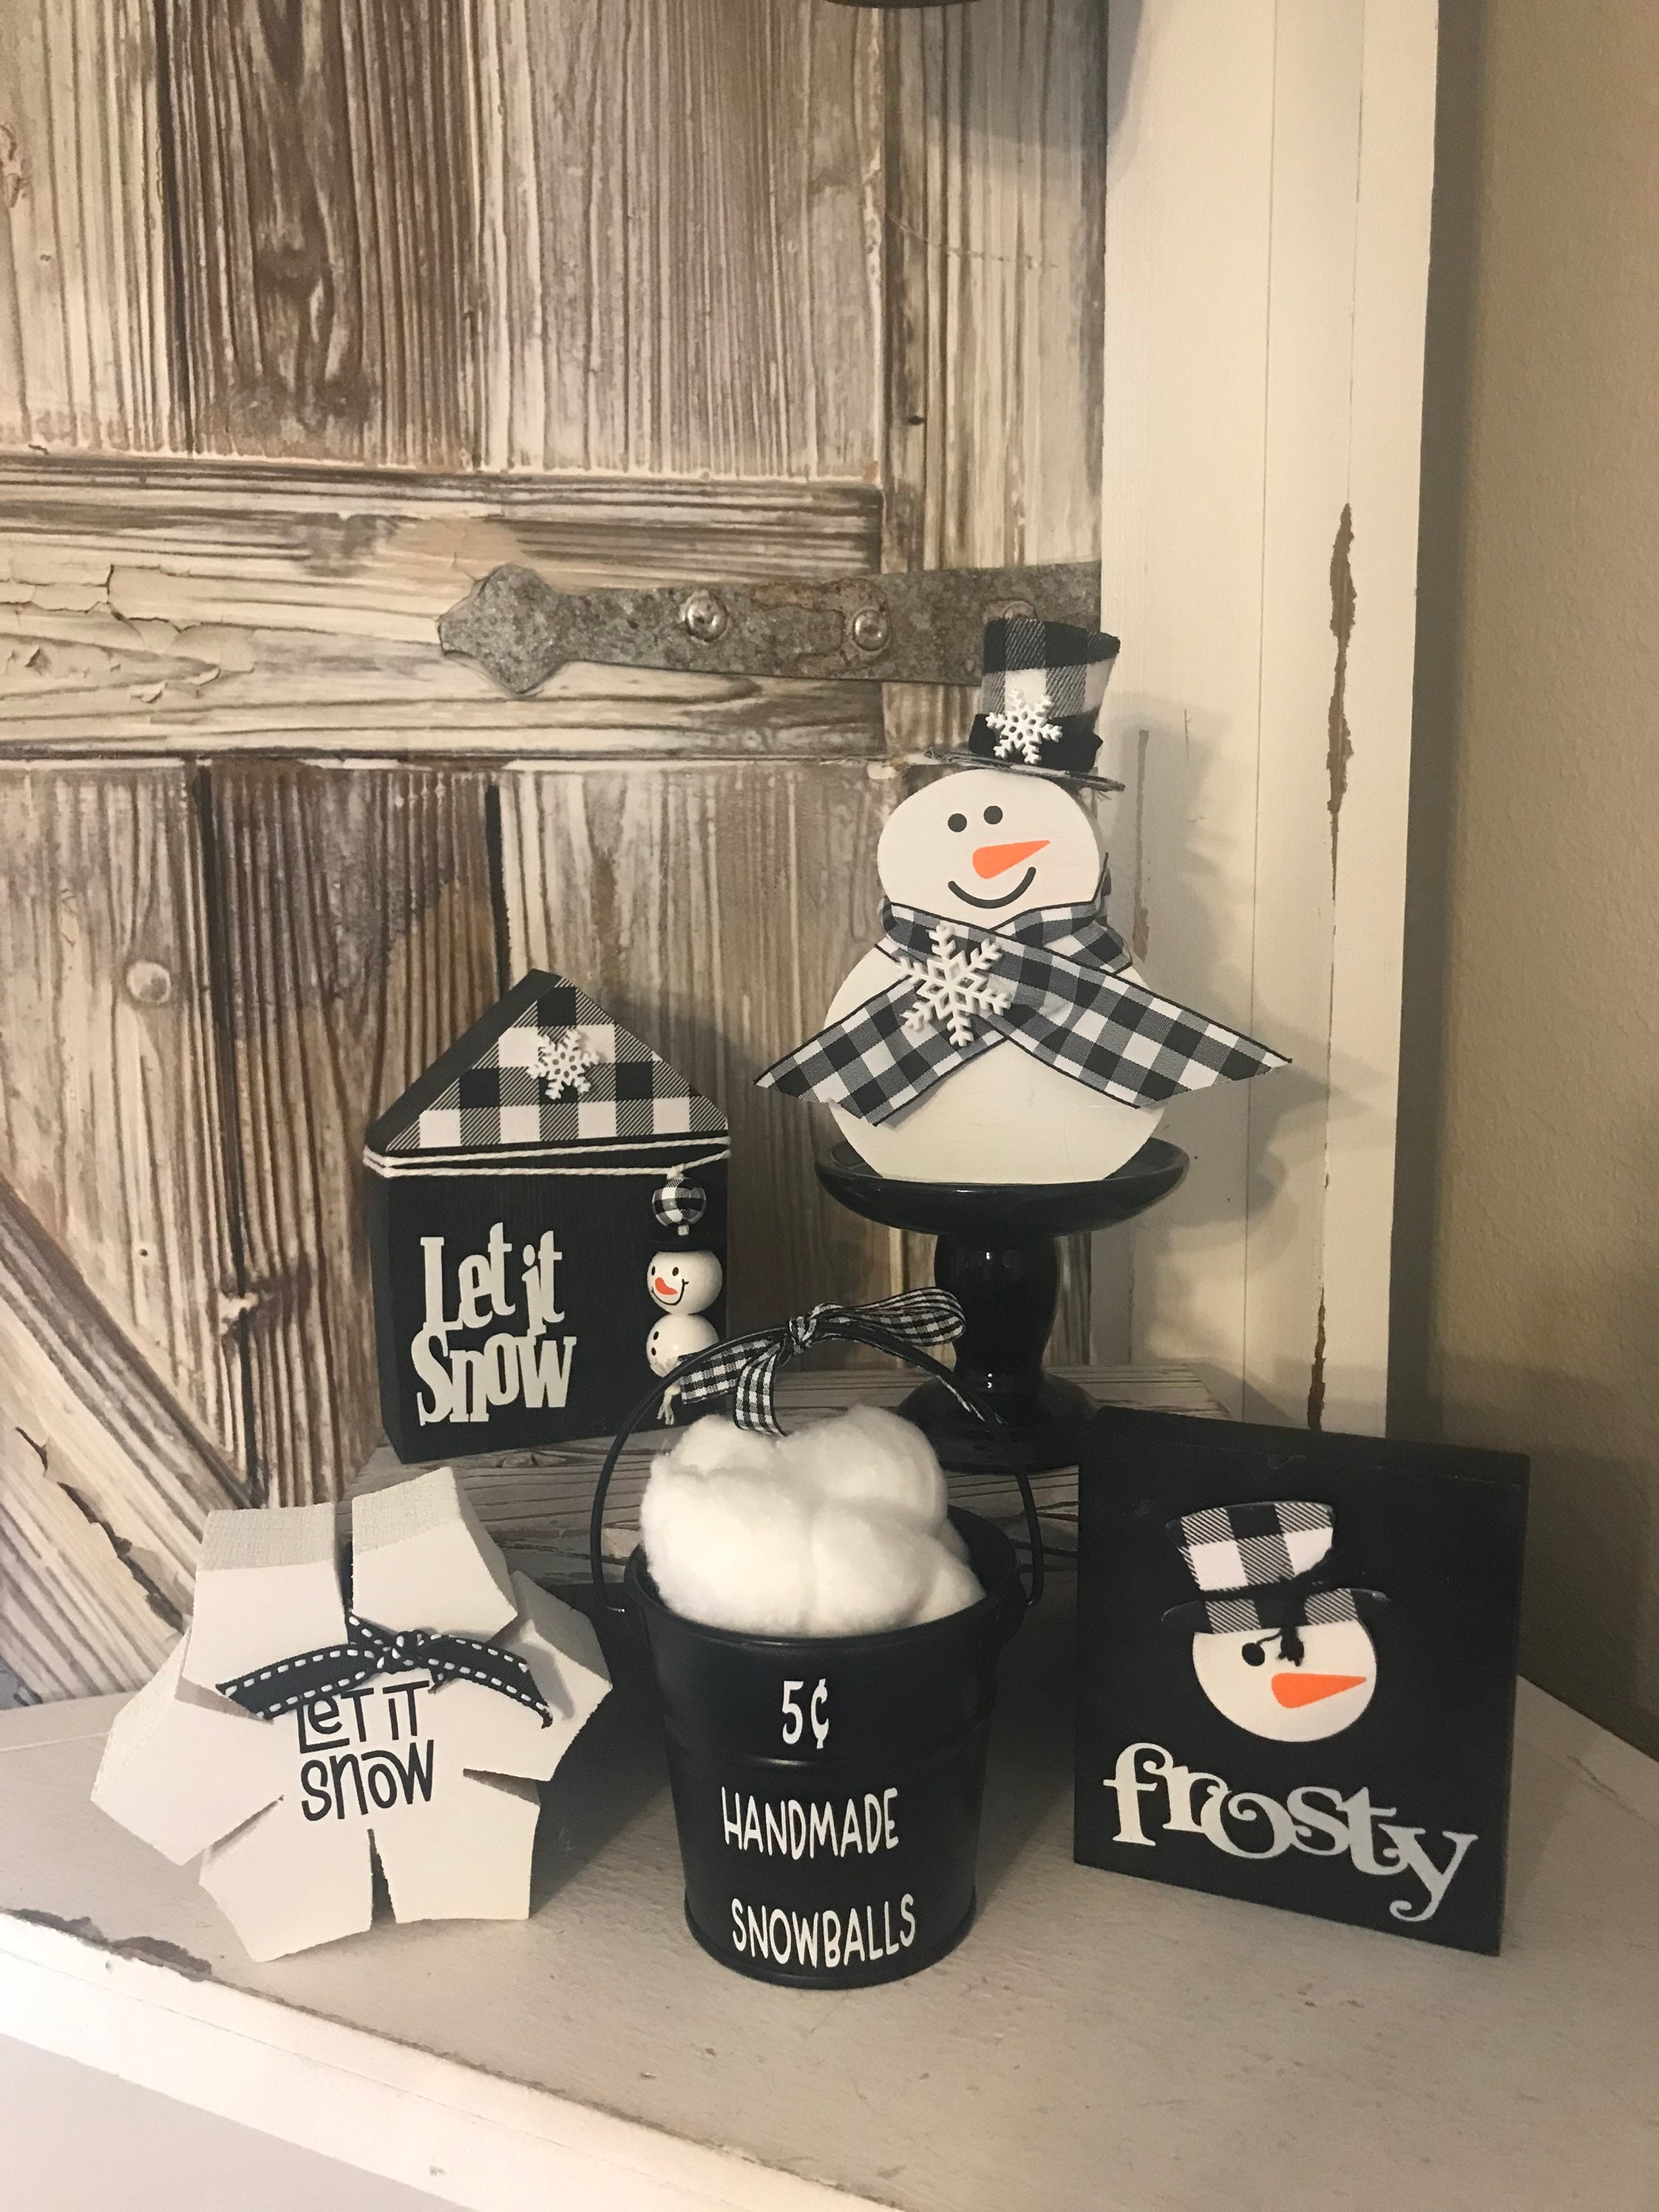 Details about   FROSTY SNOWMAN MINI SIGN TIERED TRAY BUFFALO PLAID  SNOW FARMHOUSE RUSTIC DECOR 